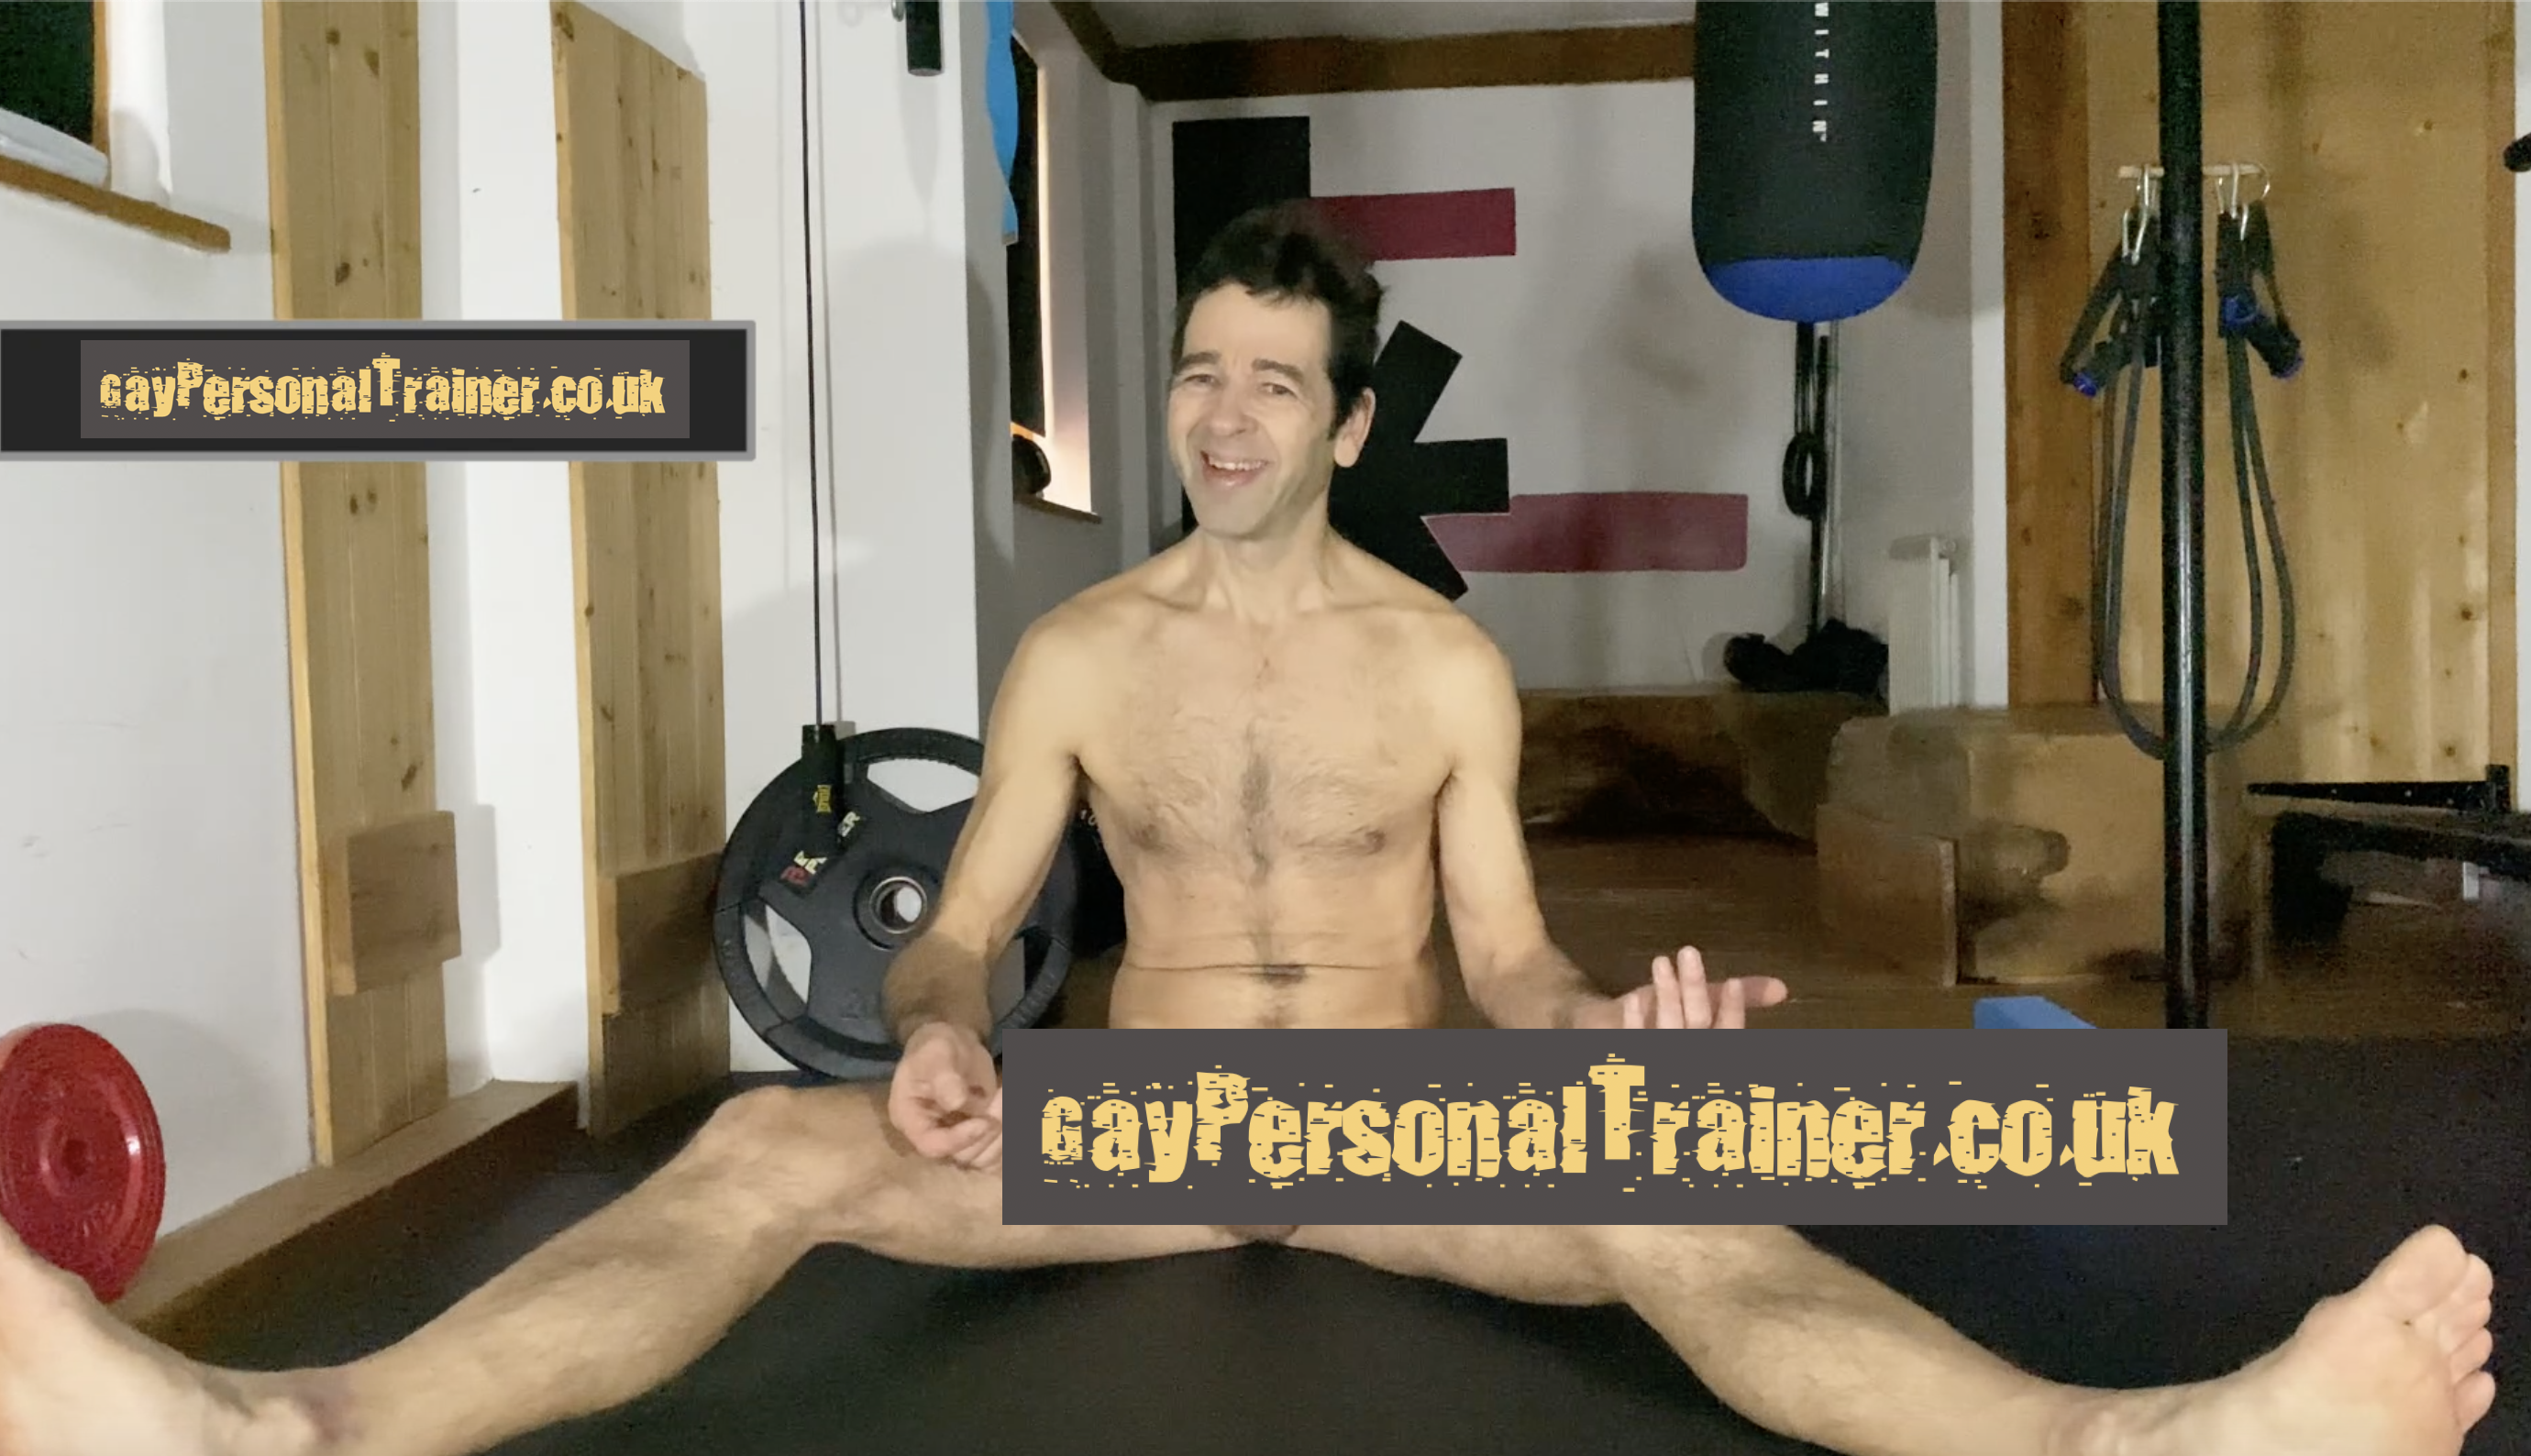 gay personal trainer naked on the floor with some writing to hide penis from view